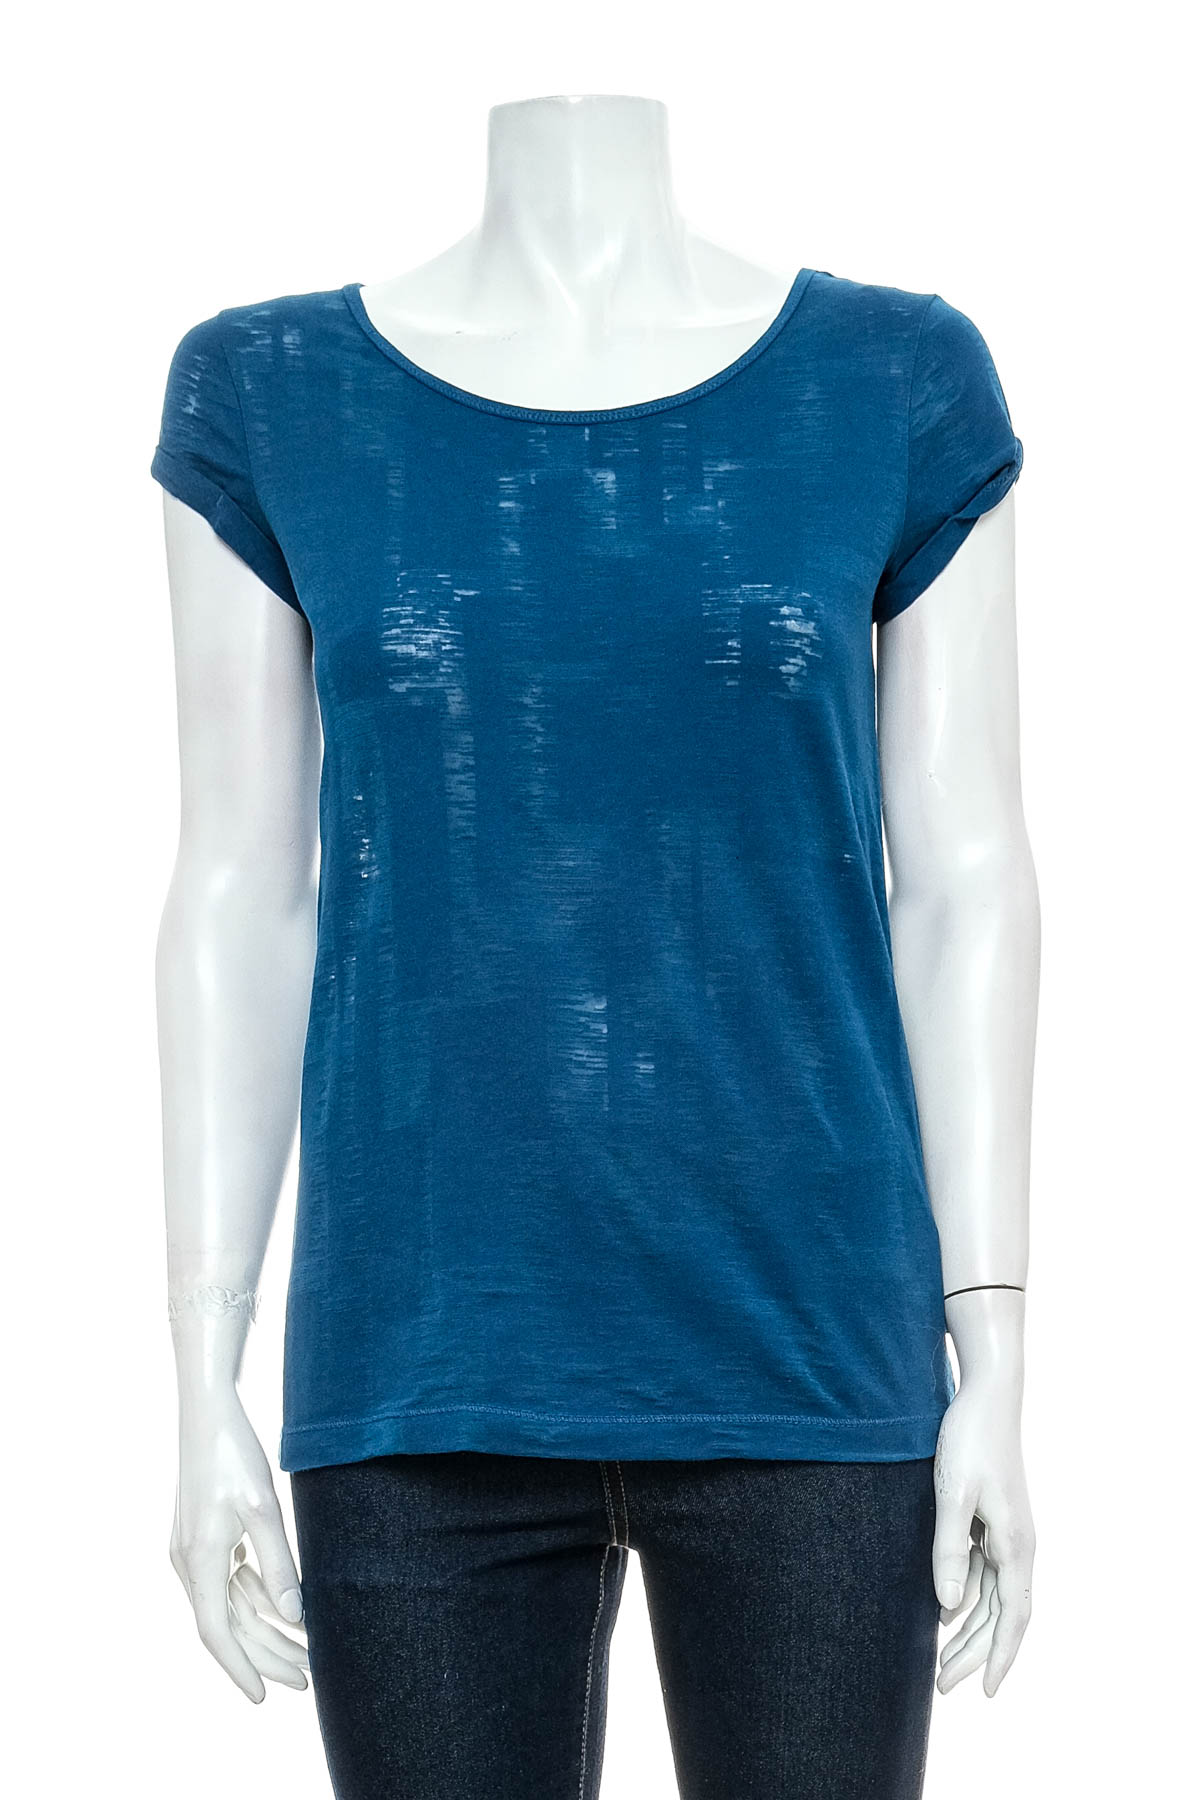 Women's t-shirt - QS by S.Oliver - 0